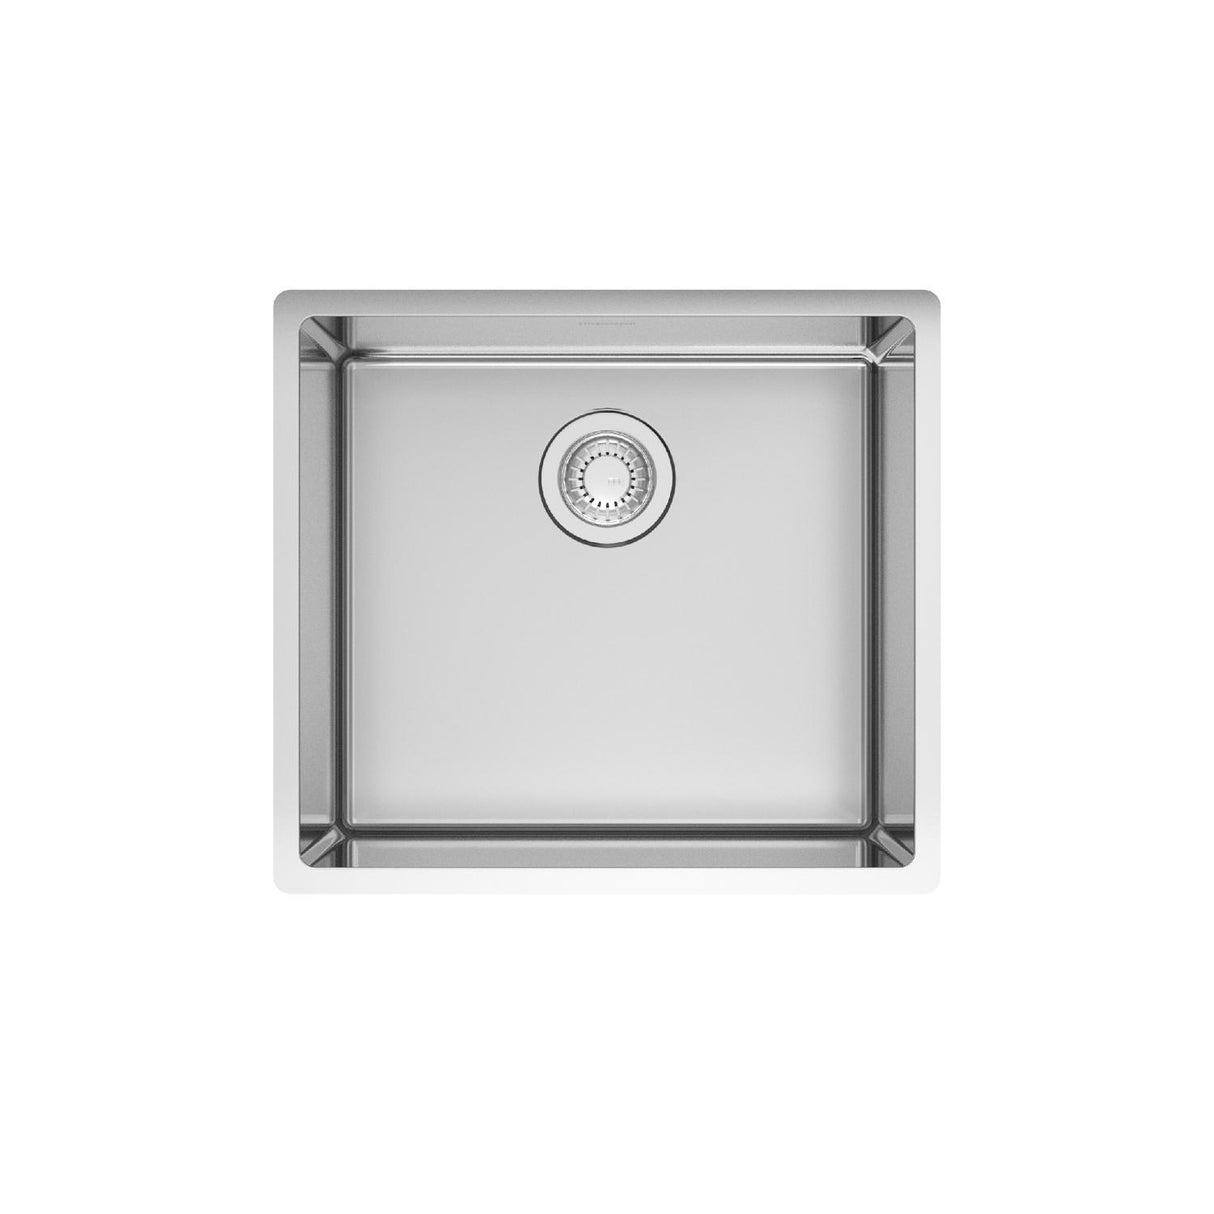 FRANKE CUX11019 Cube 19.56-in. x 17.75-in. 18 Gauge Stainless Steel Undermount Single Bowl Kitchen Sink - CUX11019 In Pearl